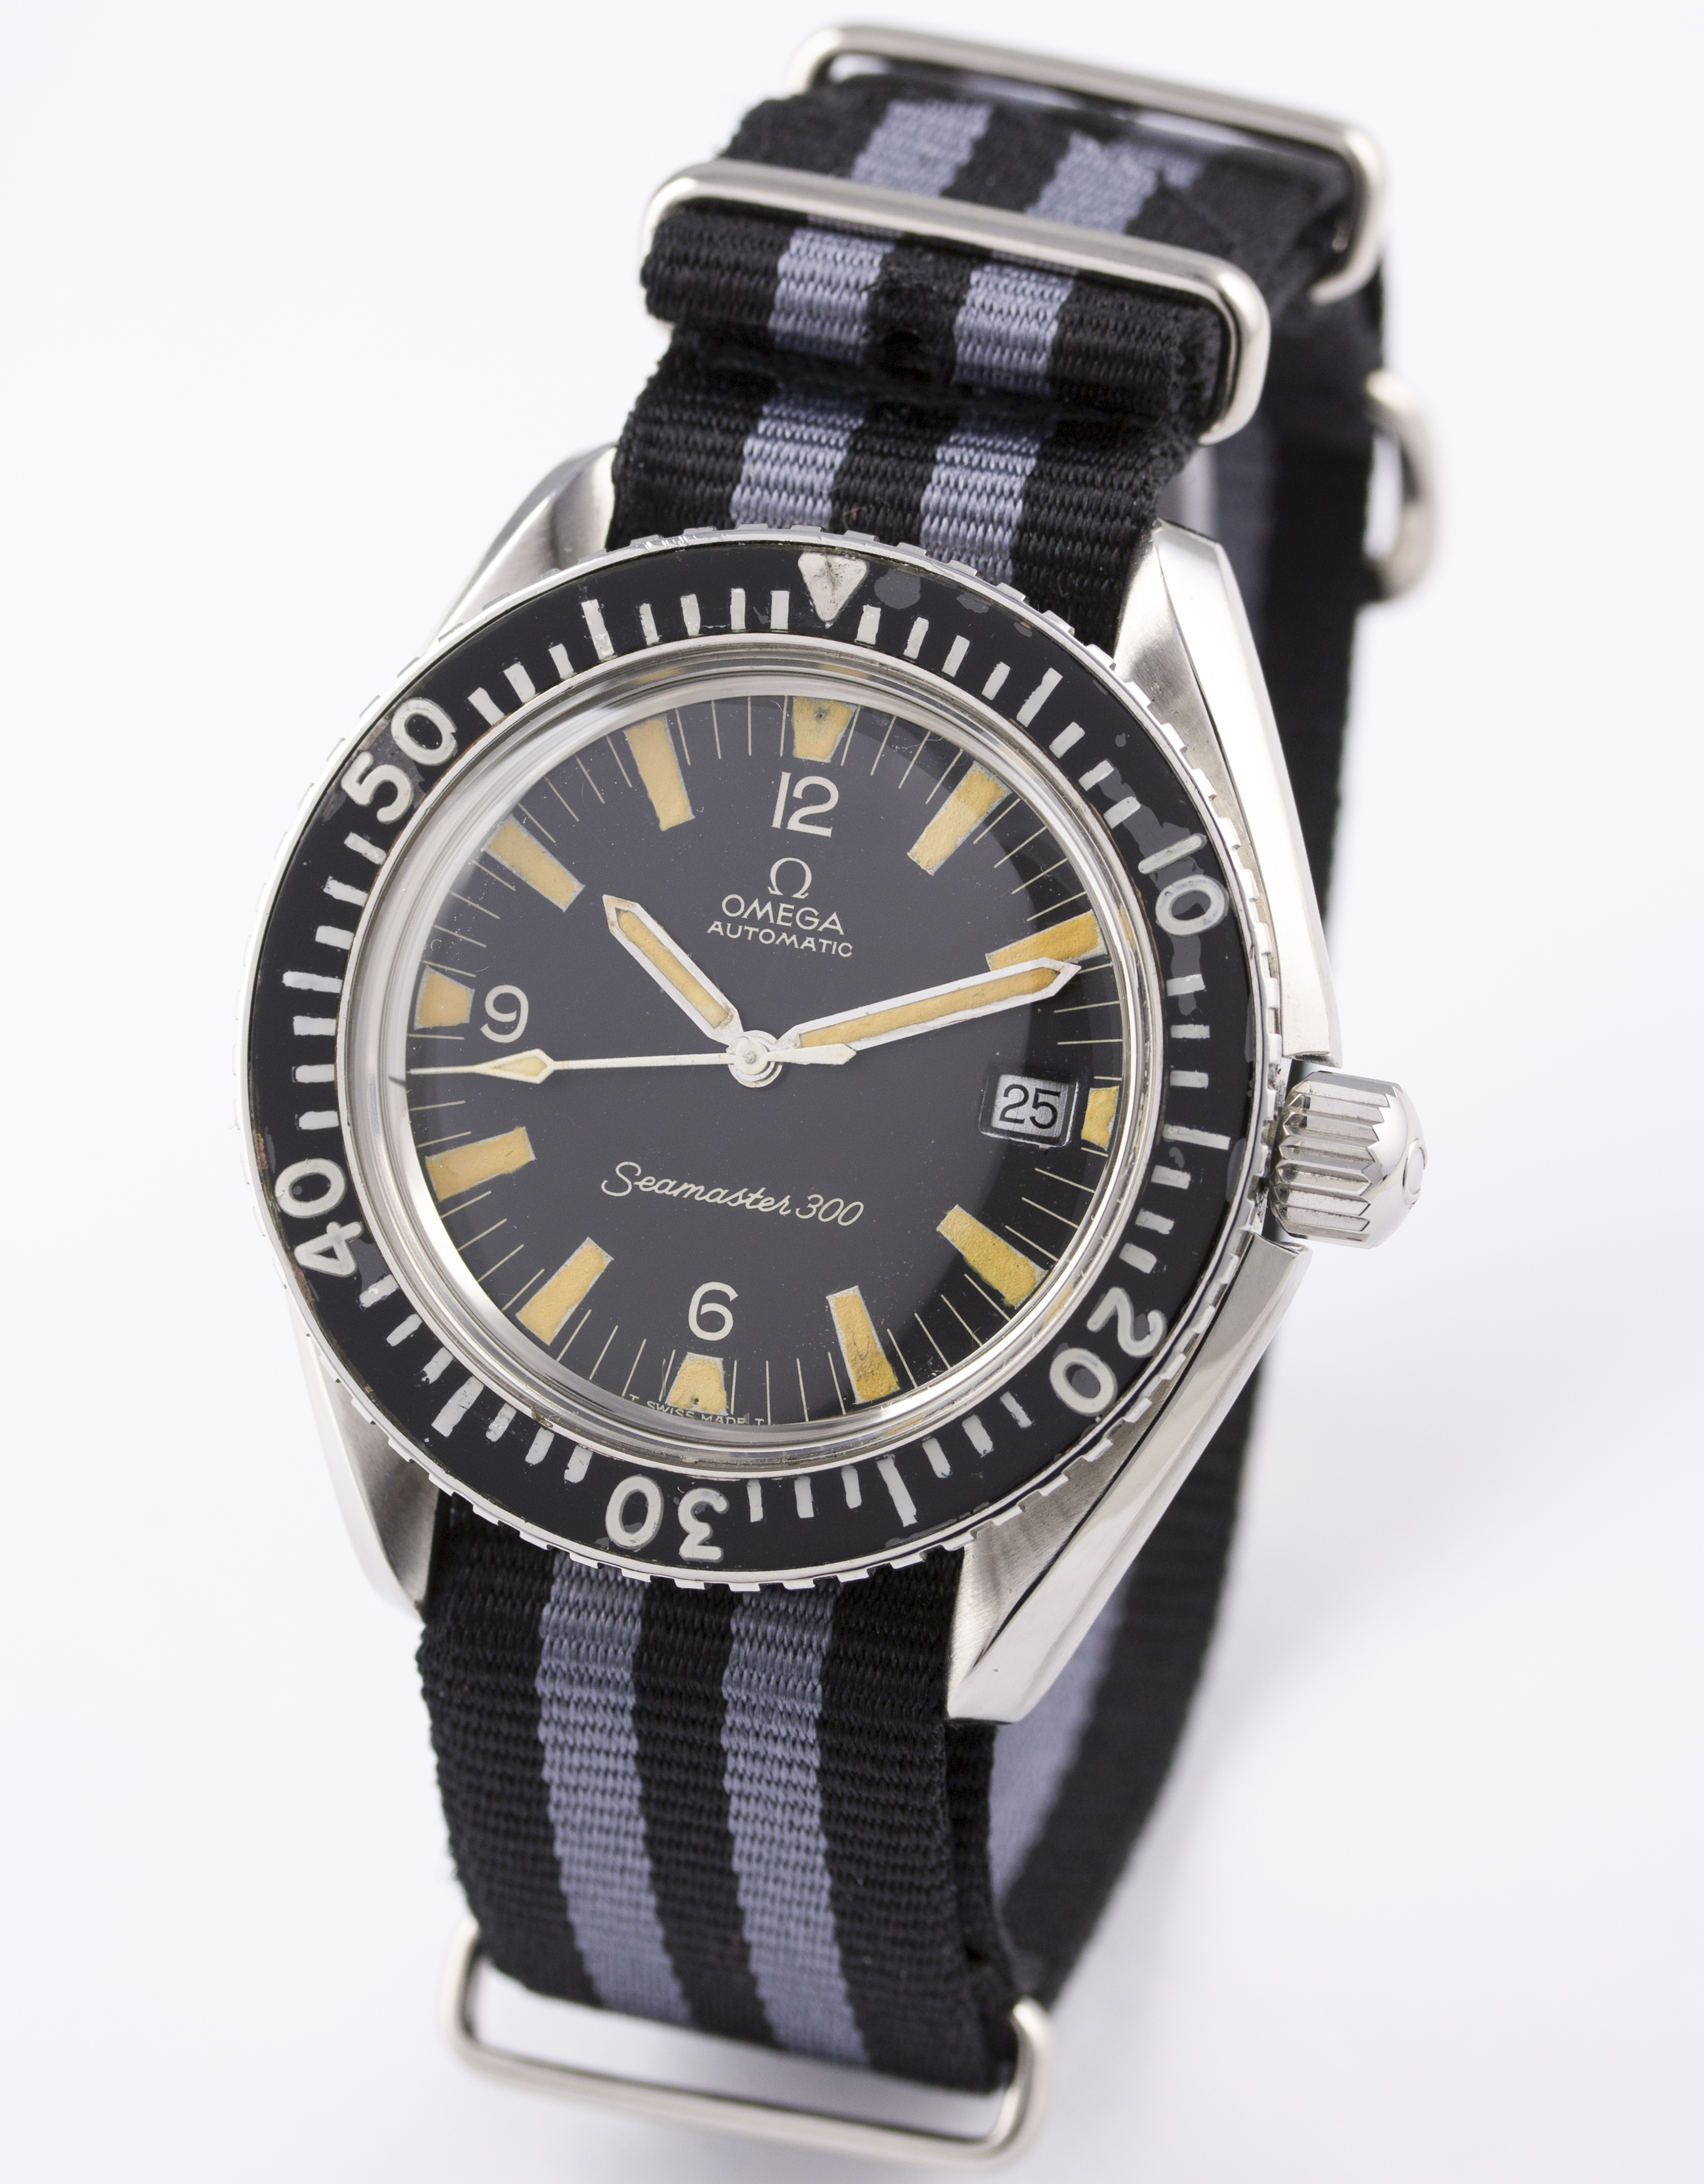 A RARE GENTLEMAN'S STAINLESS STEEL OMEGA SEAMASTER 300 WRIST WATCH CIRCA 1967, REF. 166.0024-67 SC - Image 3 of 8